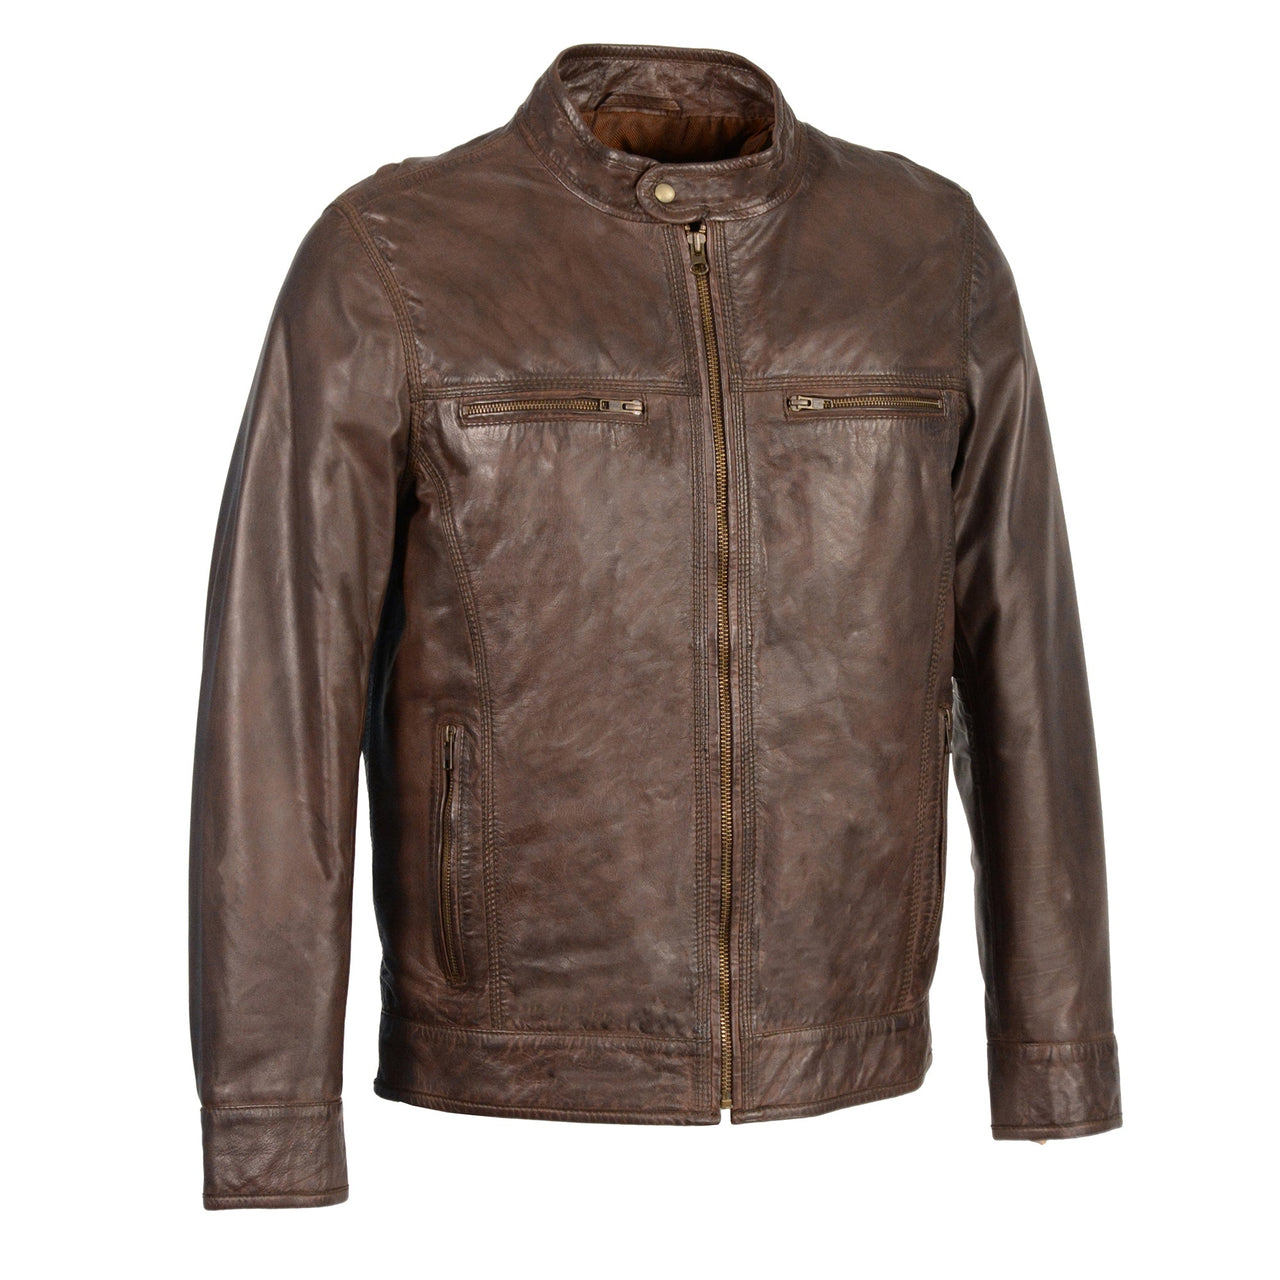 Men's Classic Moto Leather Jacket w/ Zipper Front - HighwayLeather